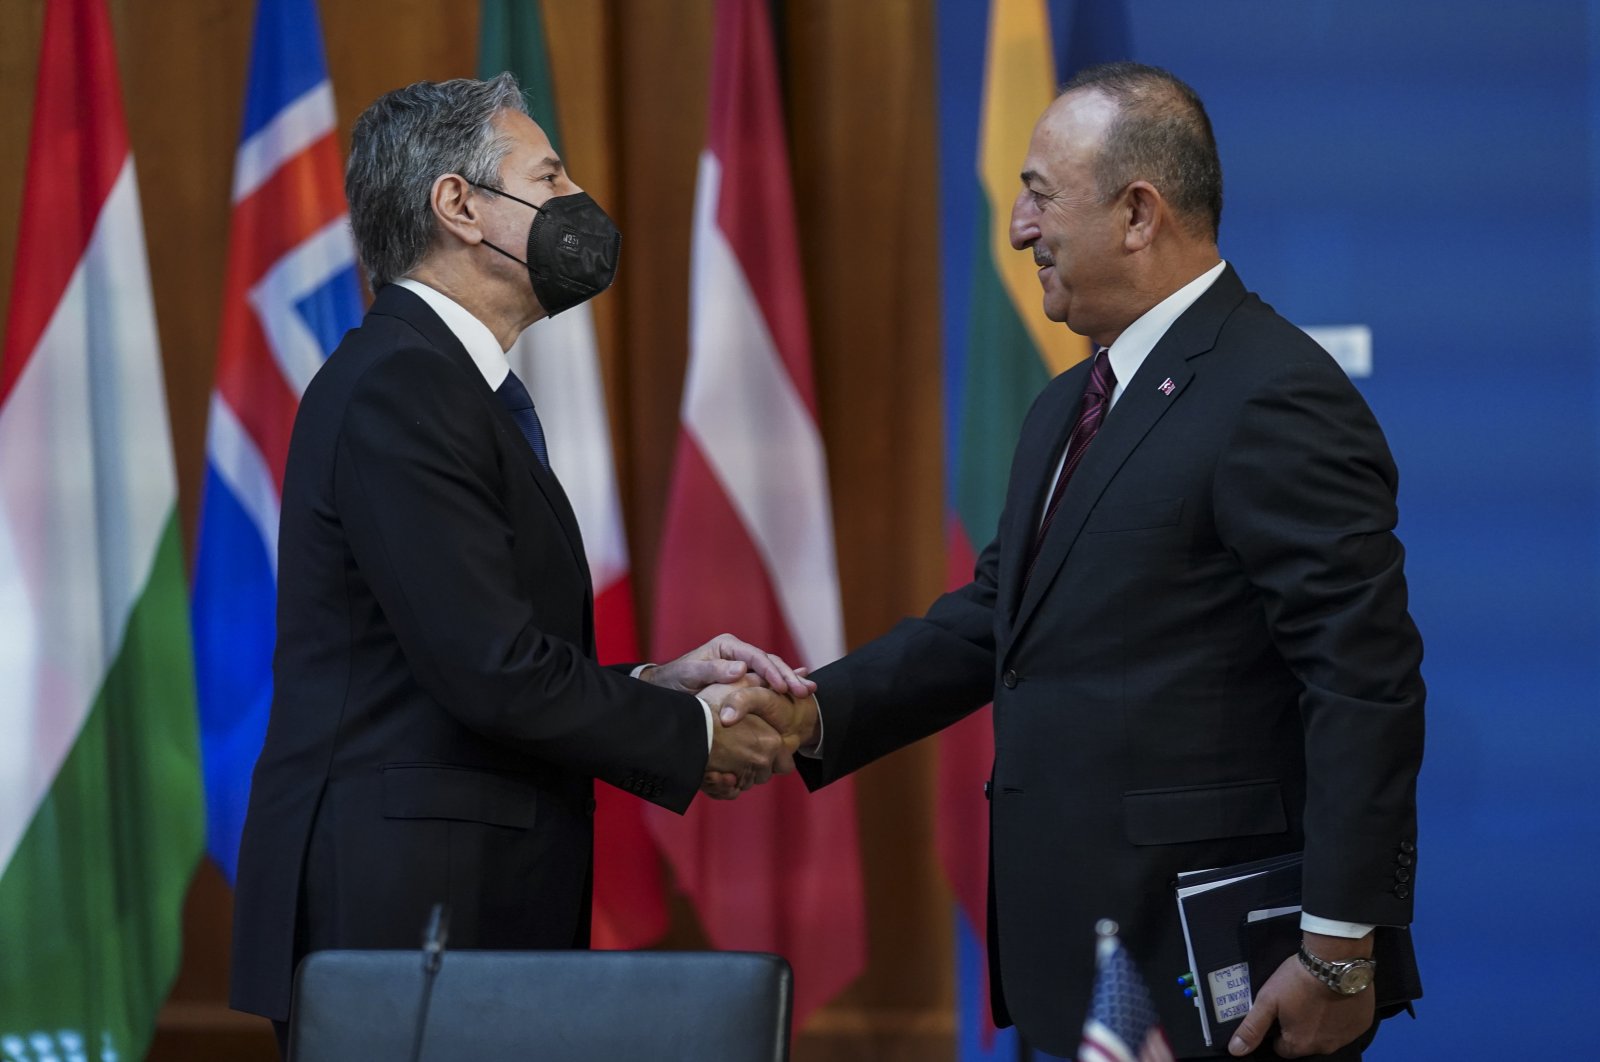 U.S. Secretary of State Antony Blinken and Turkish Foreign Minister Mevlüt Çavuşoğlu meet at the Informal Meeting of NATO Ministers of Foreign Affair in Berlin, Germany, May 15, 2022. (AP)